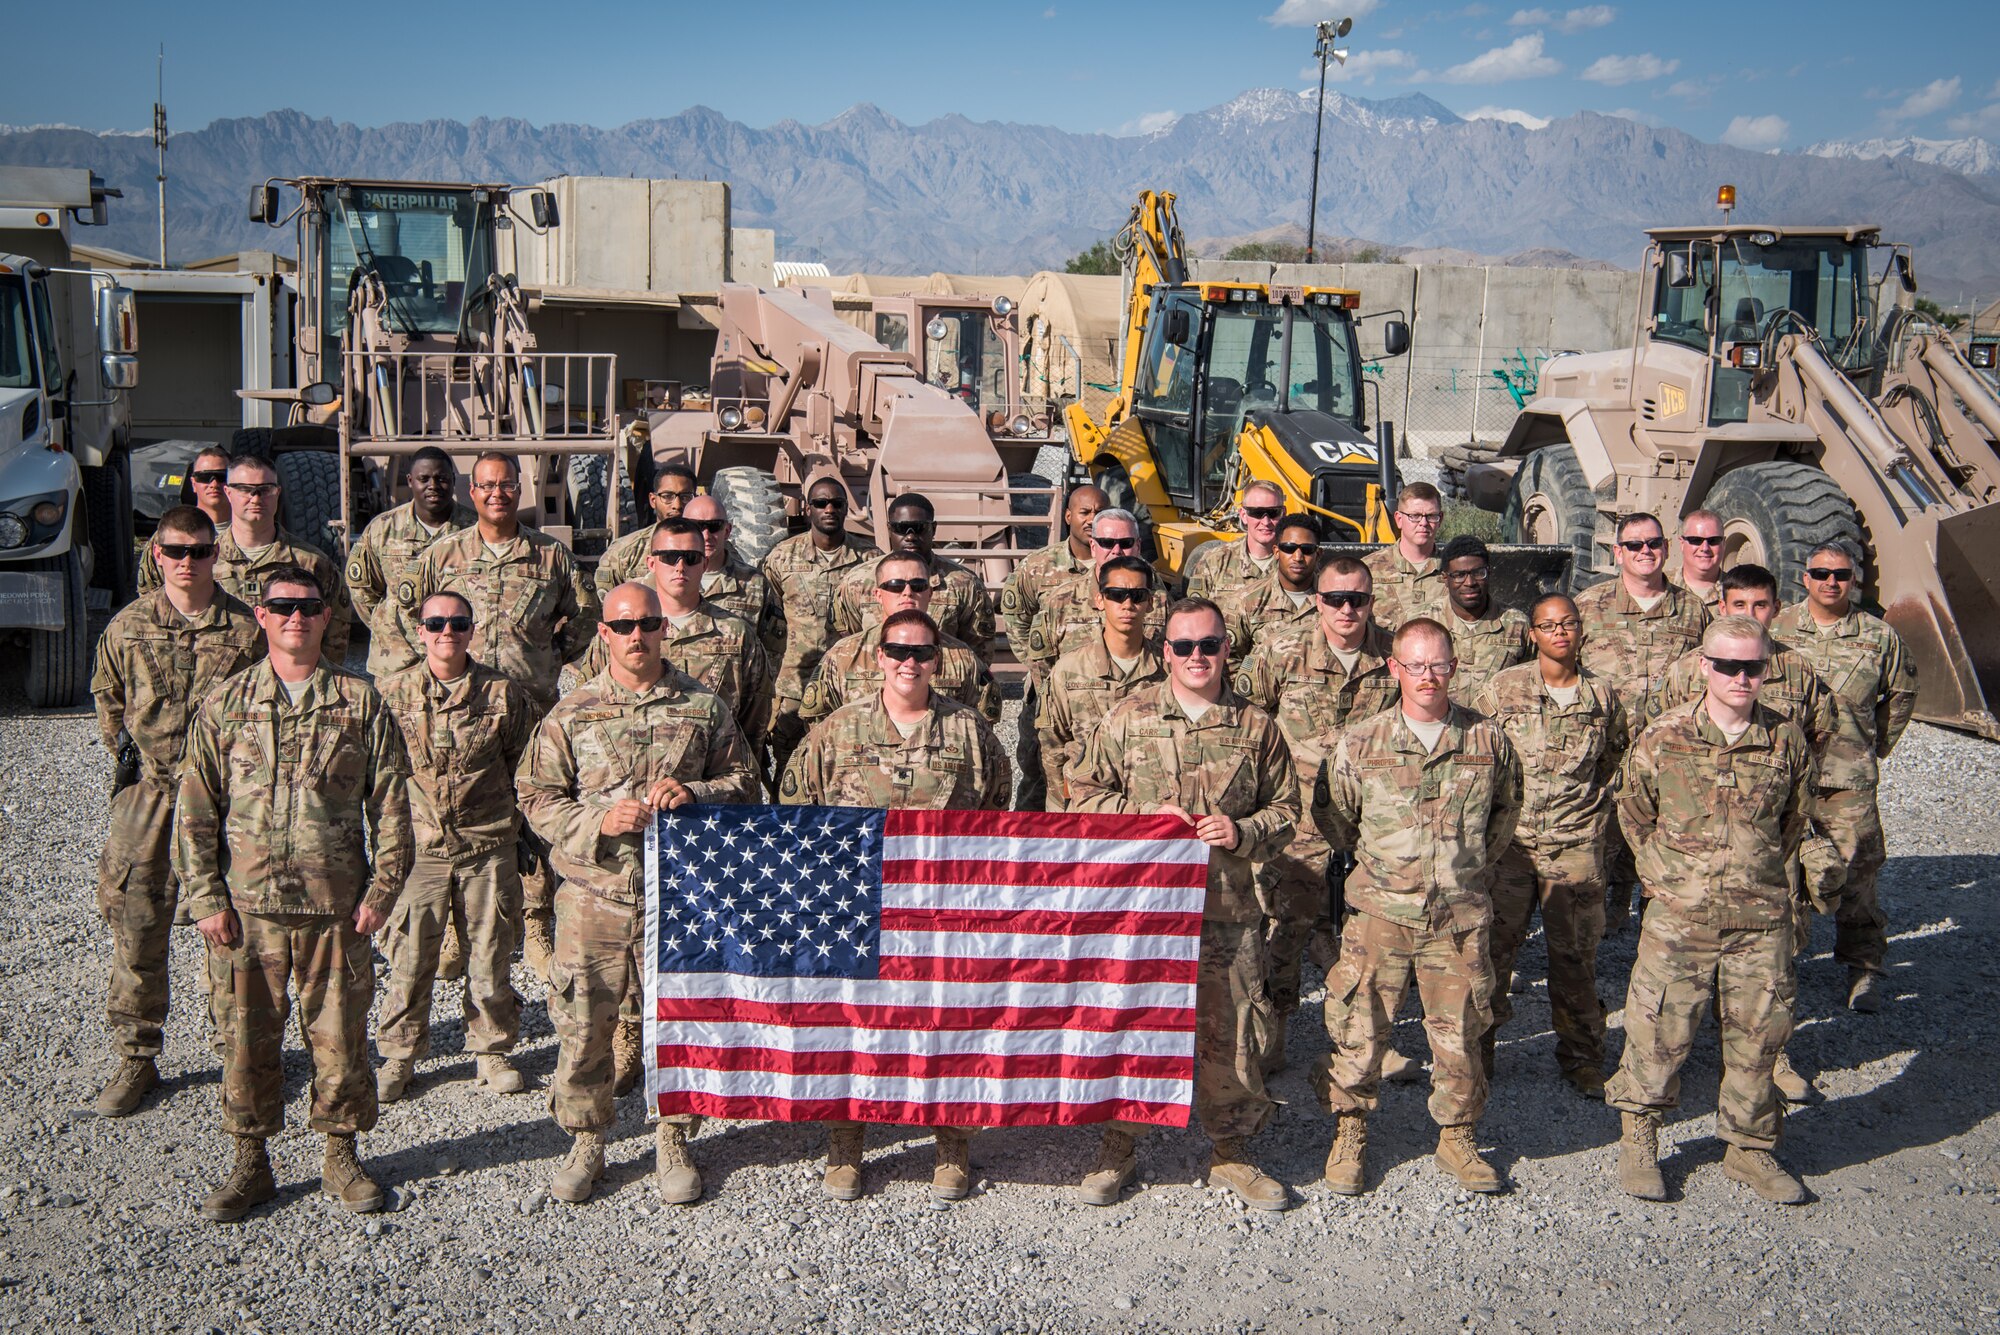 Airmen from the 1st Civil Engineer Group’s 577th Expeditionary Prime Base Engineer Emergency Force Squadron pose for a group photo at Bagram Airfield, Afghanistan, May 4, 2018. Separate from traditional civil engineer units, the members of the 1st ECEG perform construction and repair in high-risk environments all across the area of operations. (U.S. Air Force photo by Staff Sgt. Joshua Horton)